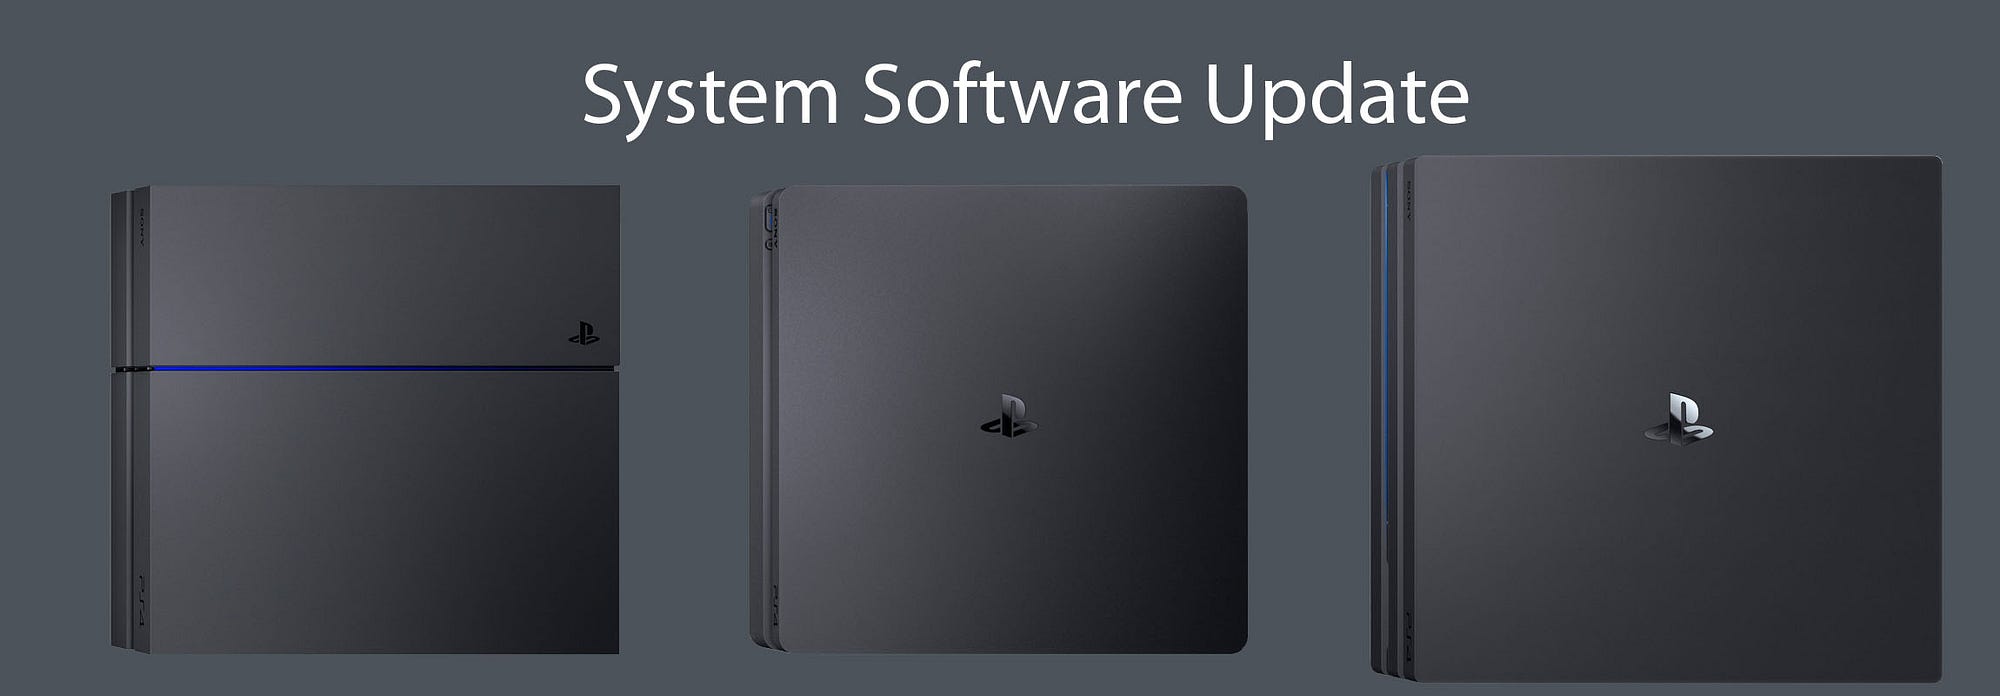 Sony System Software Update